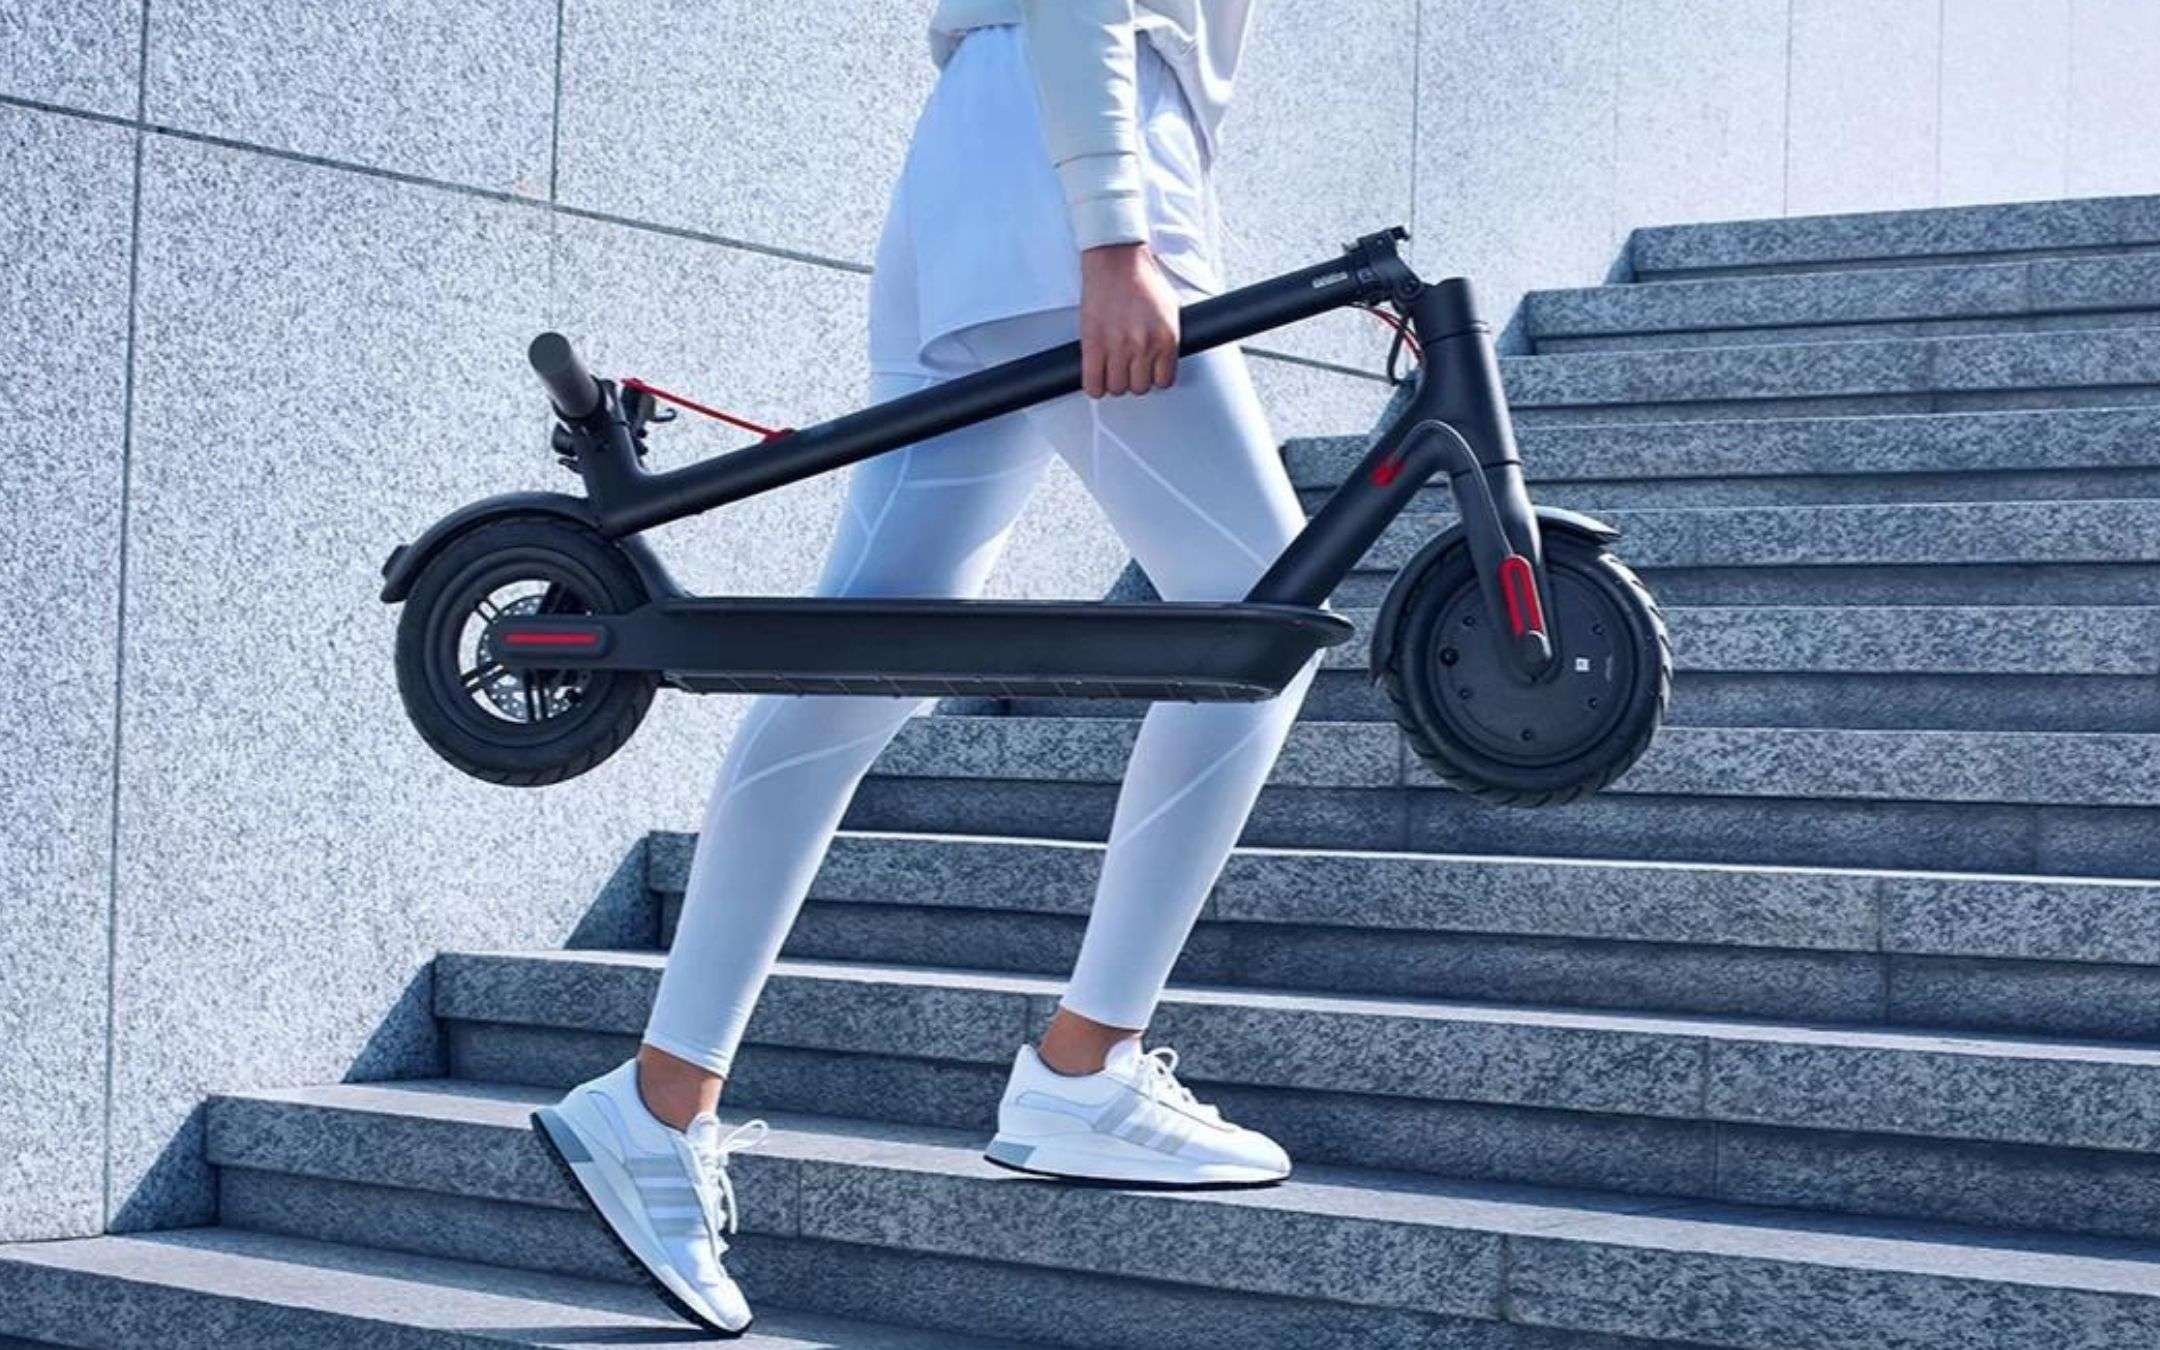 Xiaomi mijia electric scooter 1s. Самокат Xiaomi Mijia Electric Scooter 1s Black. Xiaomi Mijia 1s самокат. Электросамокат Xiaomi Mijia 1s, черный.